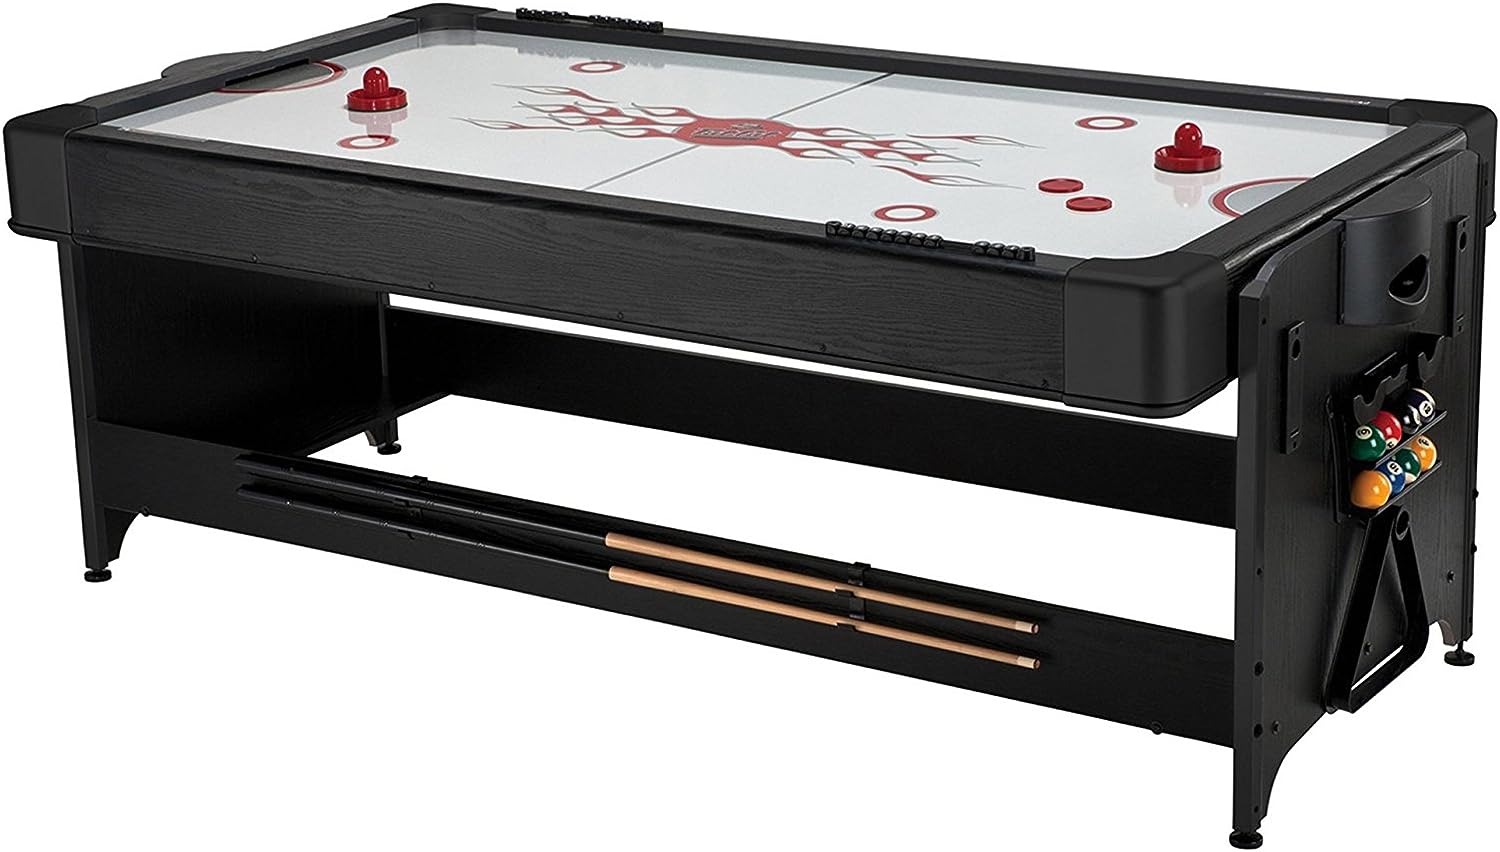 Air hockey version of the Fat Cat 3 In 1 Flip Game Table 7 Foot